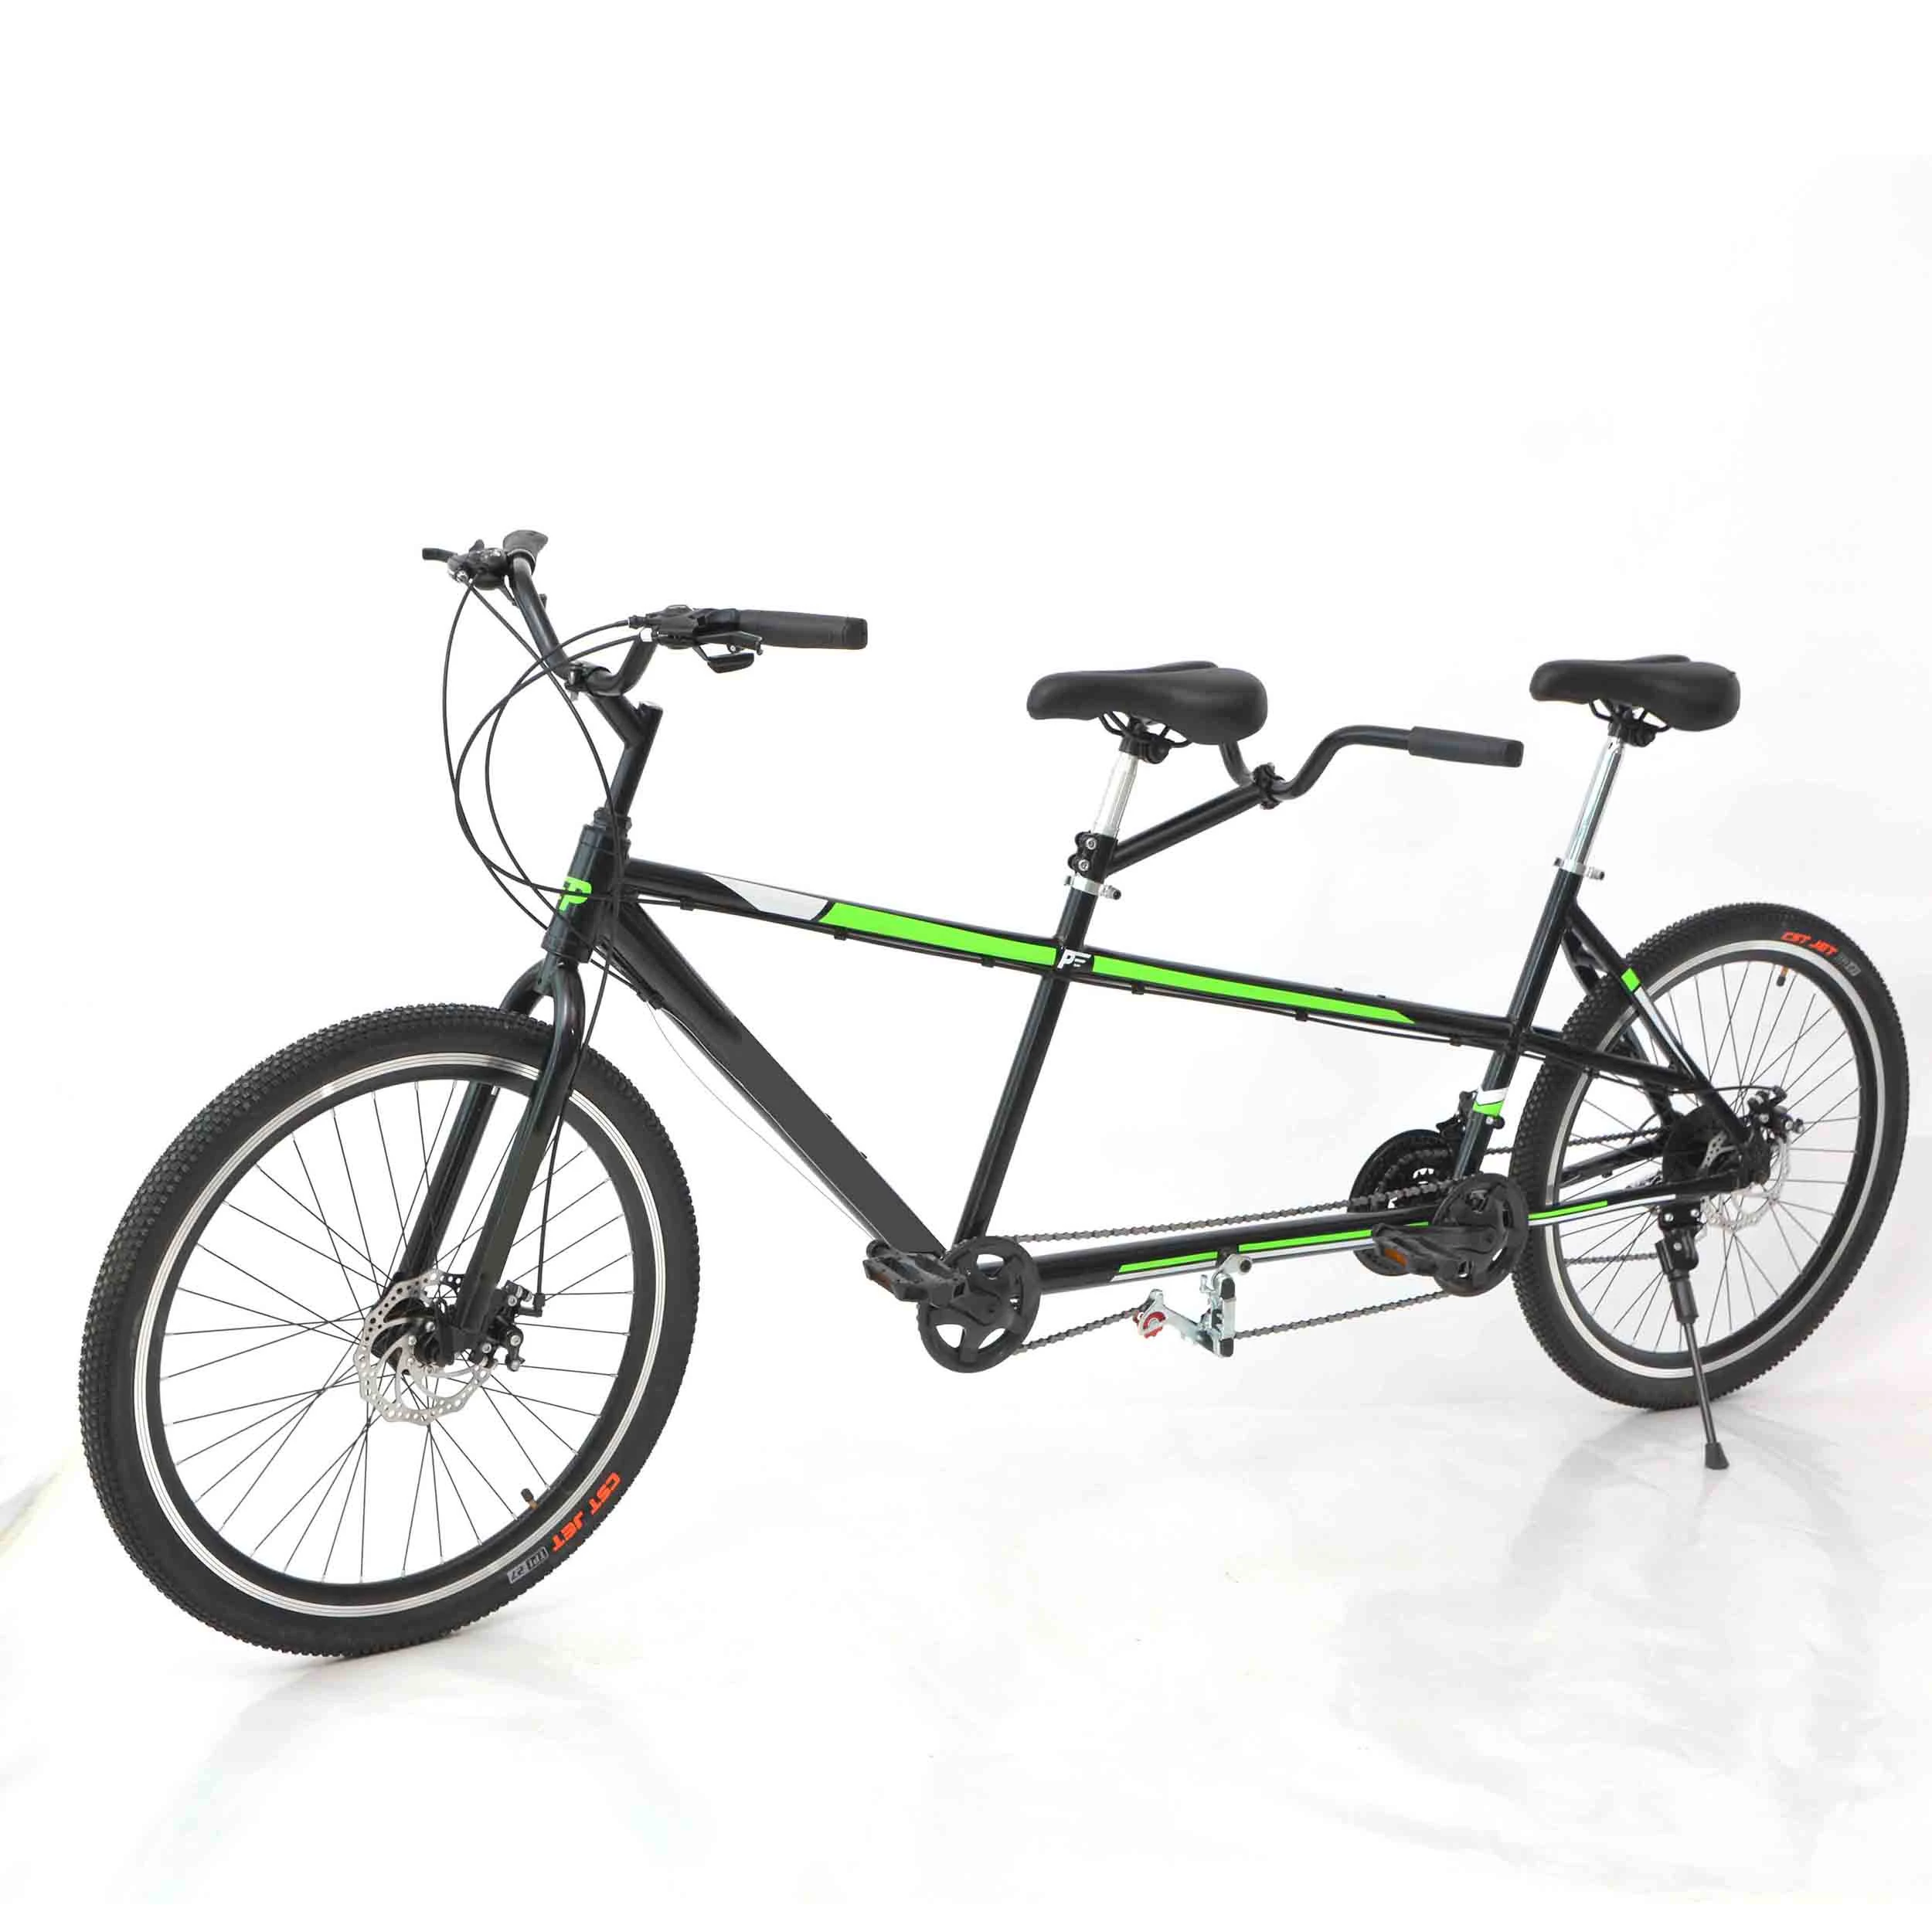 26 inch 21 Speed Adult Aluminum Alloy Frame 2 Rider Mountain Bike Bicycle Tandem bicycle Bike